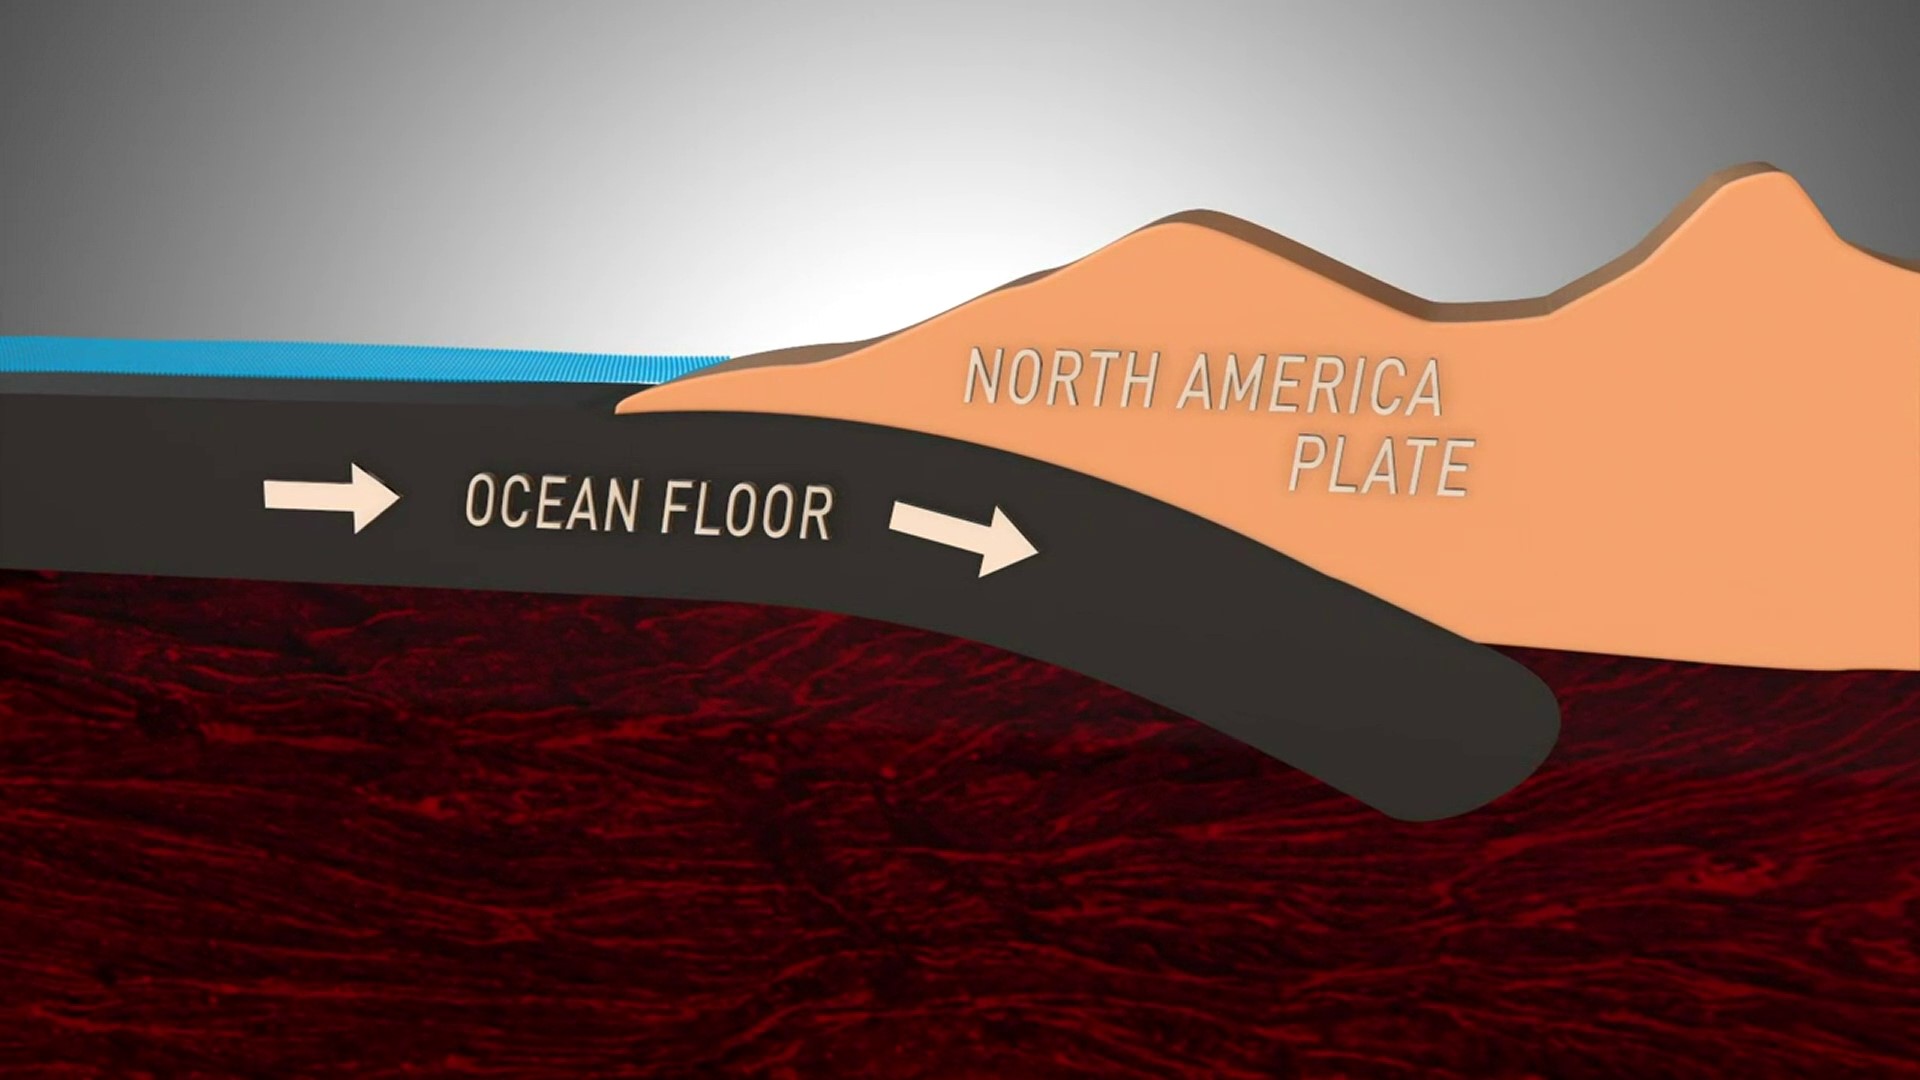 Here's how the Cascadia Subduction Zone along the Washington state coast works.